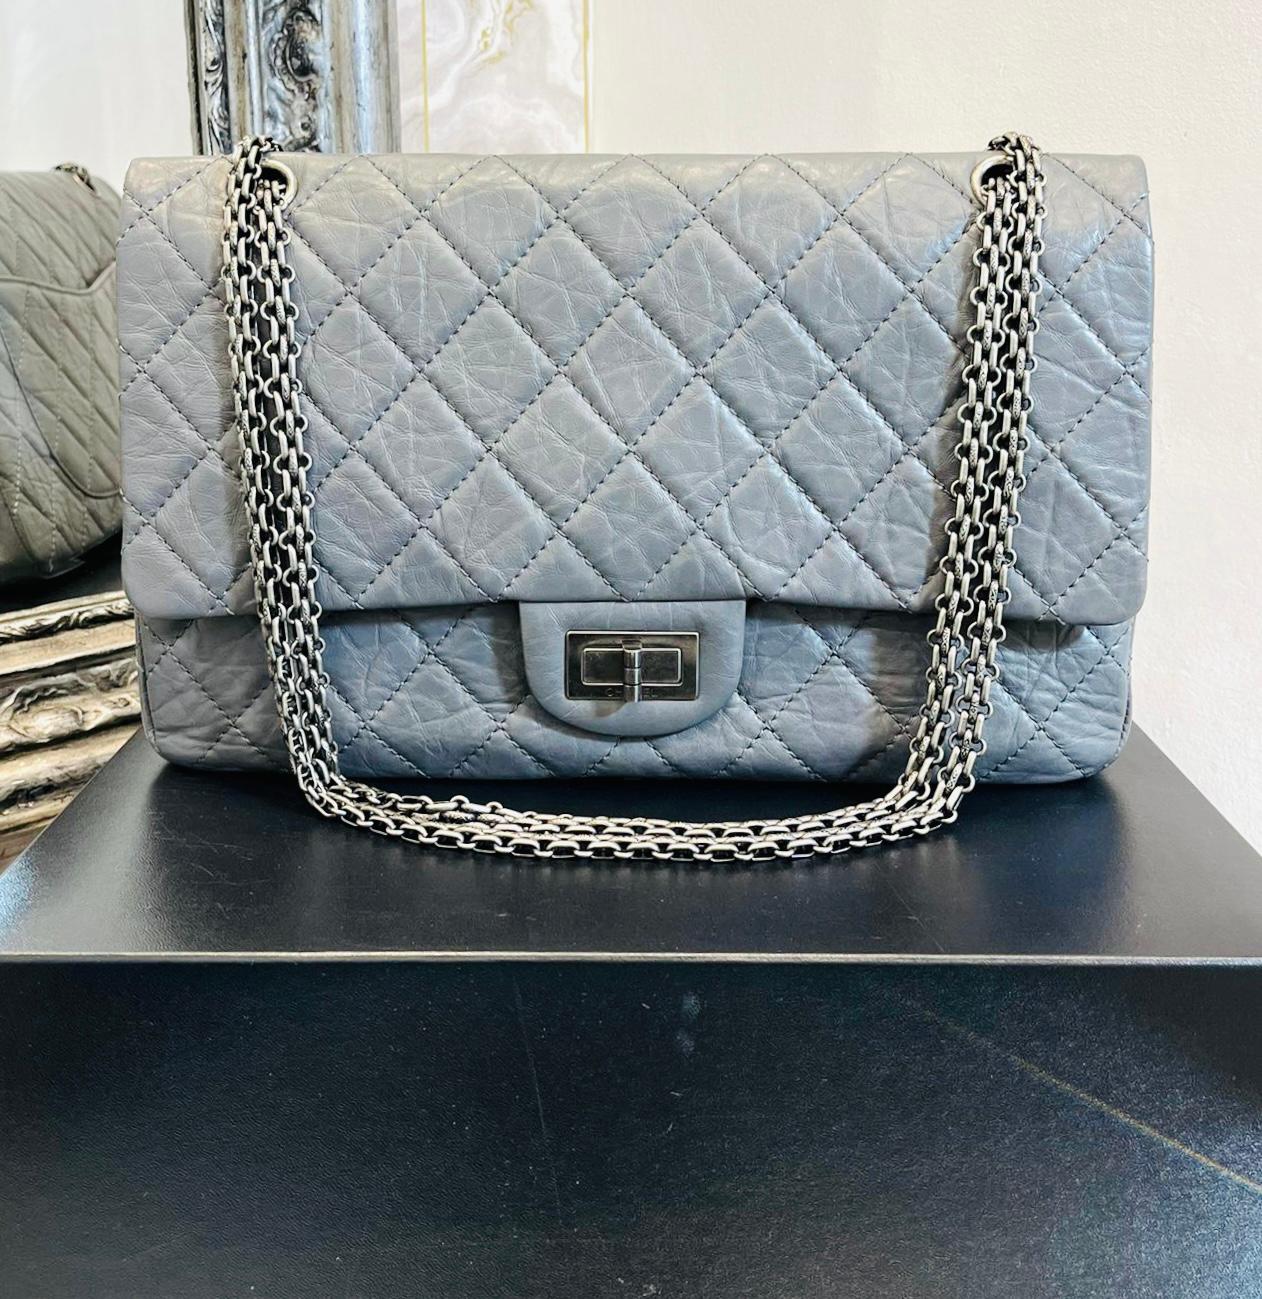 Chanel 2.55 Reissue Double Flap Leather Bag

Grey, diamond quilted handbag designed with iconic ruthenium hardware.

Featuring twist lock closure leading to magnetic double flap closure with 'CC' logo stitching detail.

Styled with shoulder chain